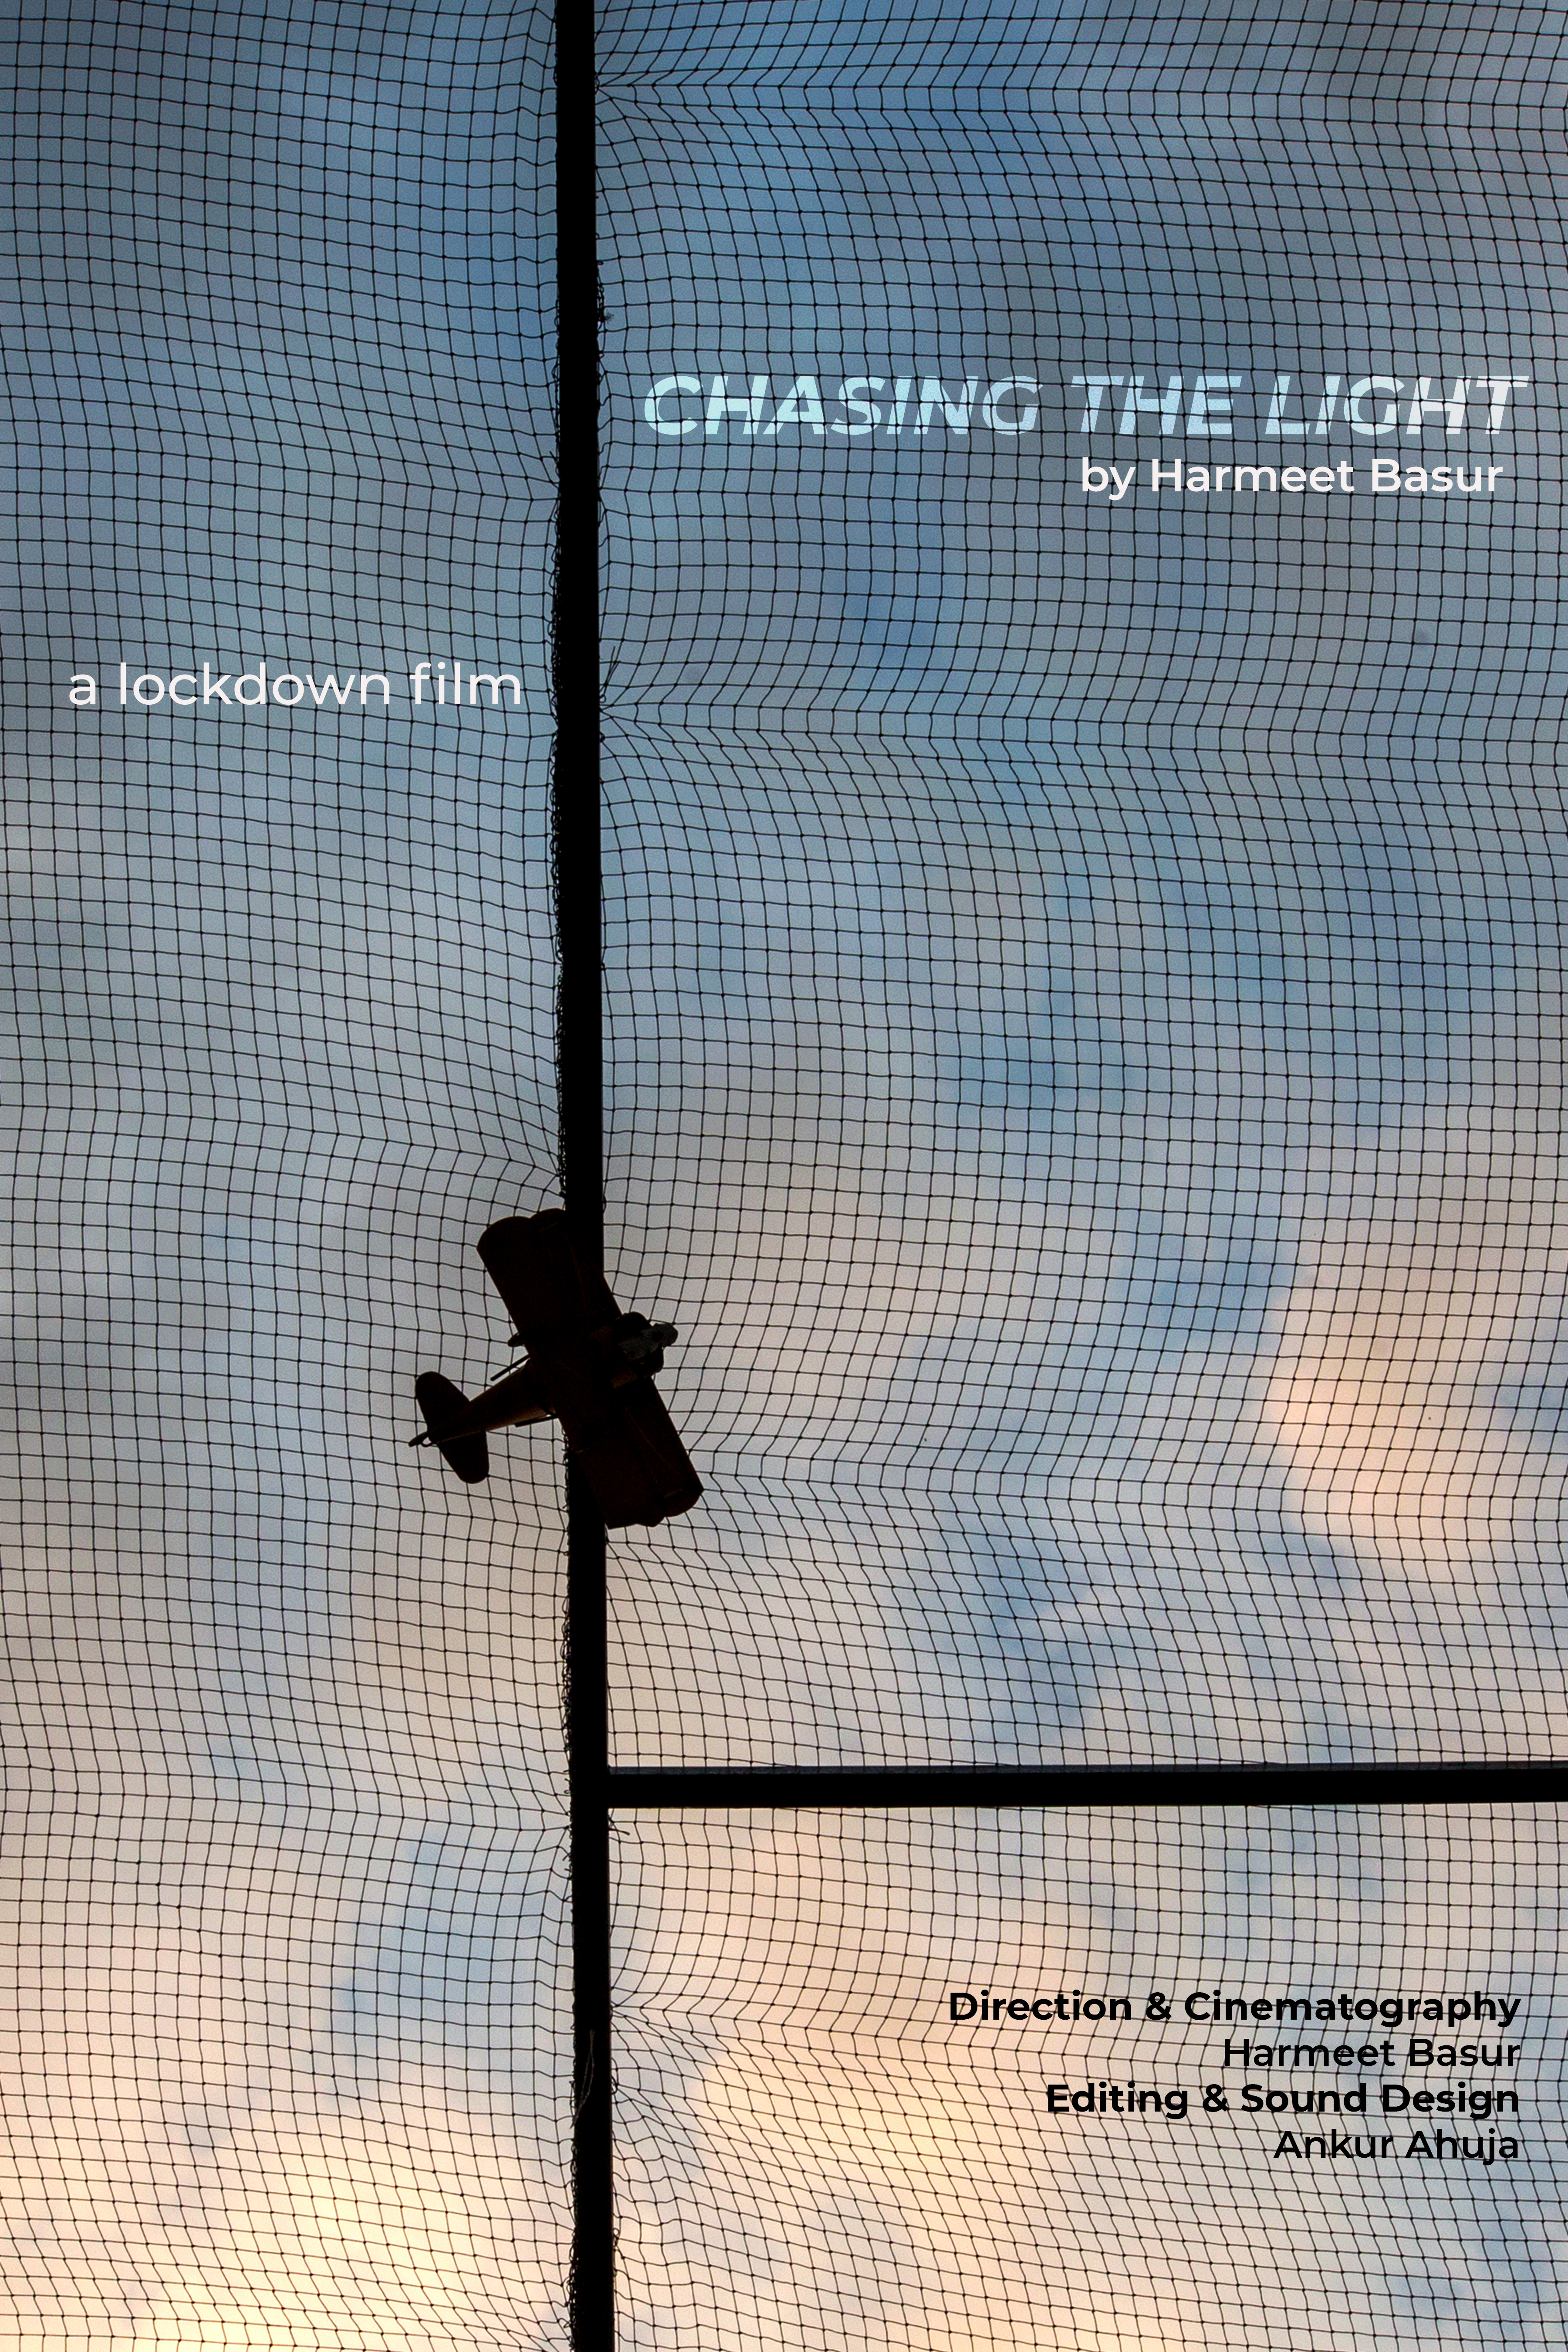 Chasing-the-light-poster